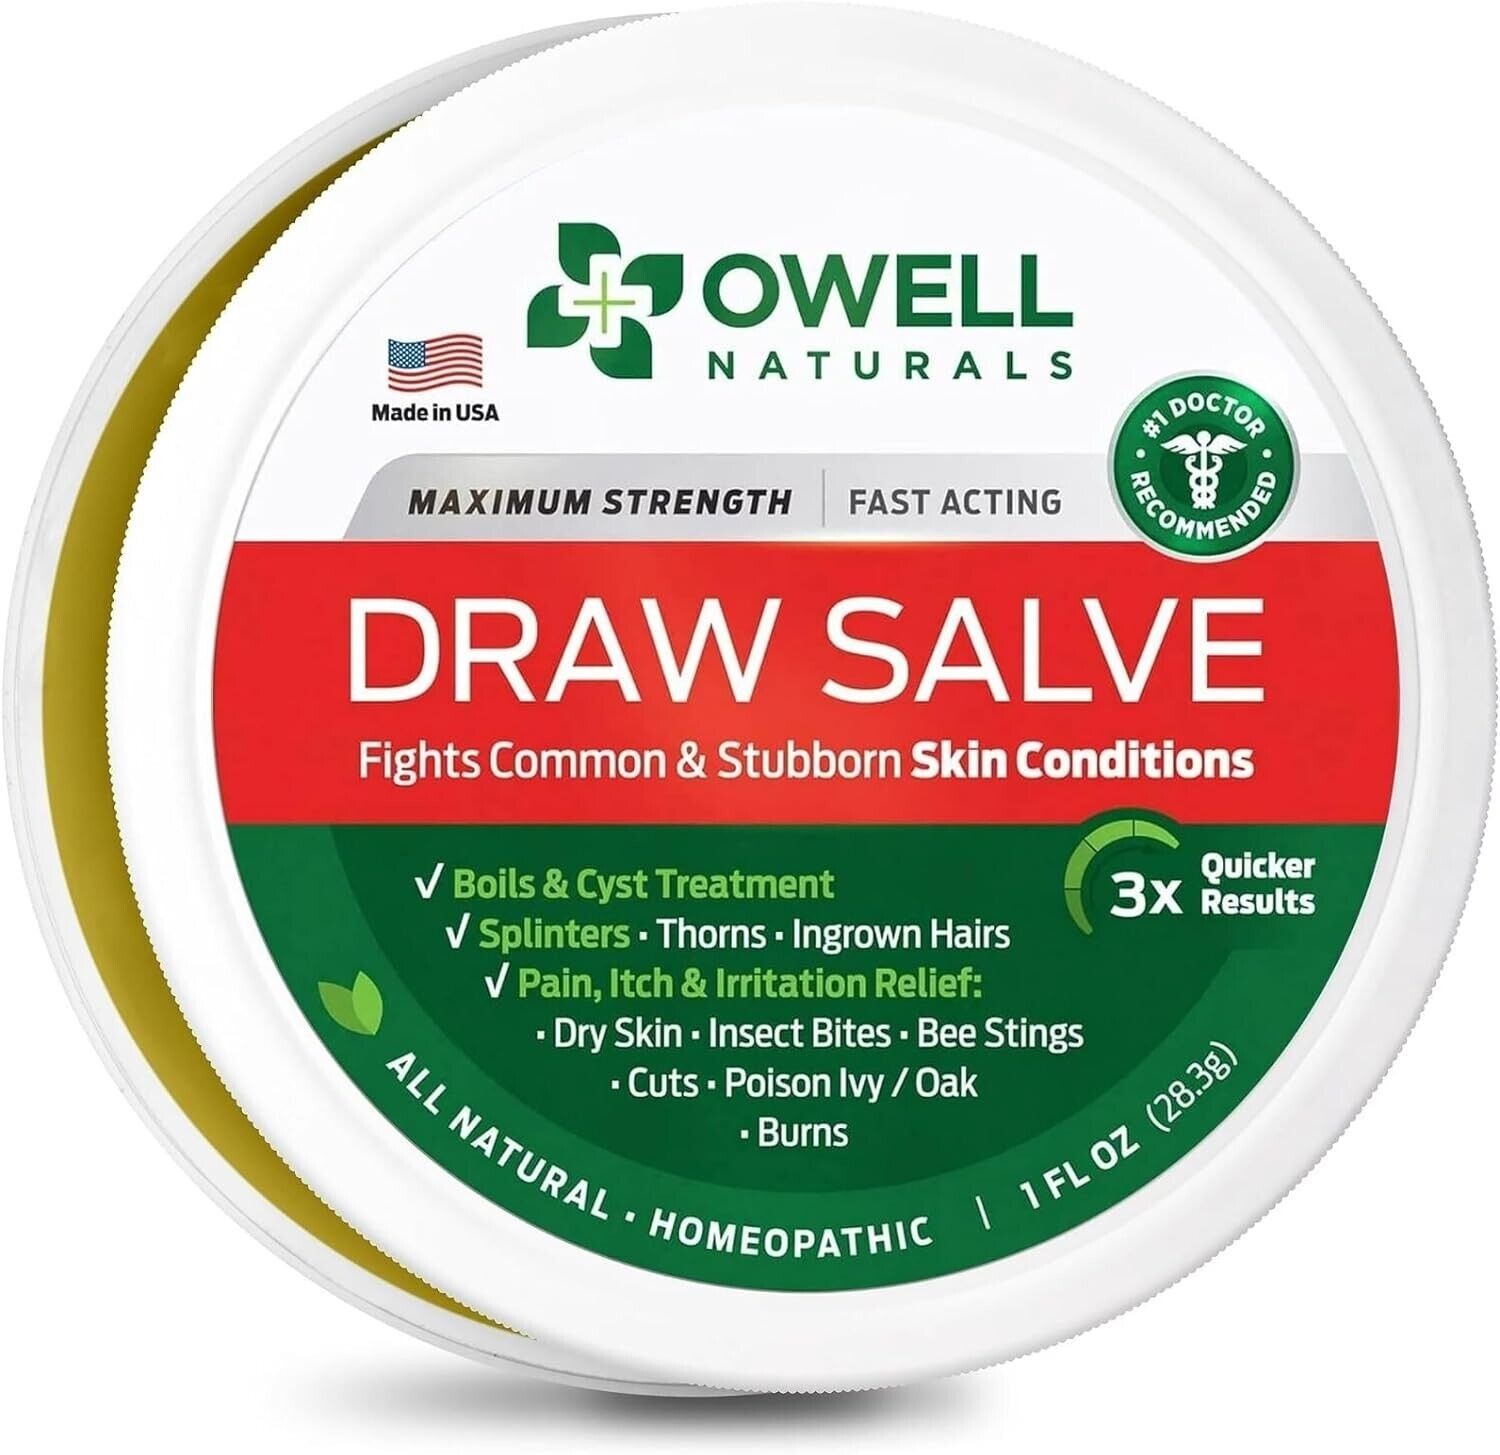 OWELL NATURALS Drawing Salve Ointment 1oz, Ingrown Hair Treatment, Boil & Cyst